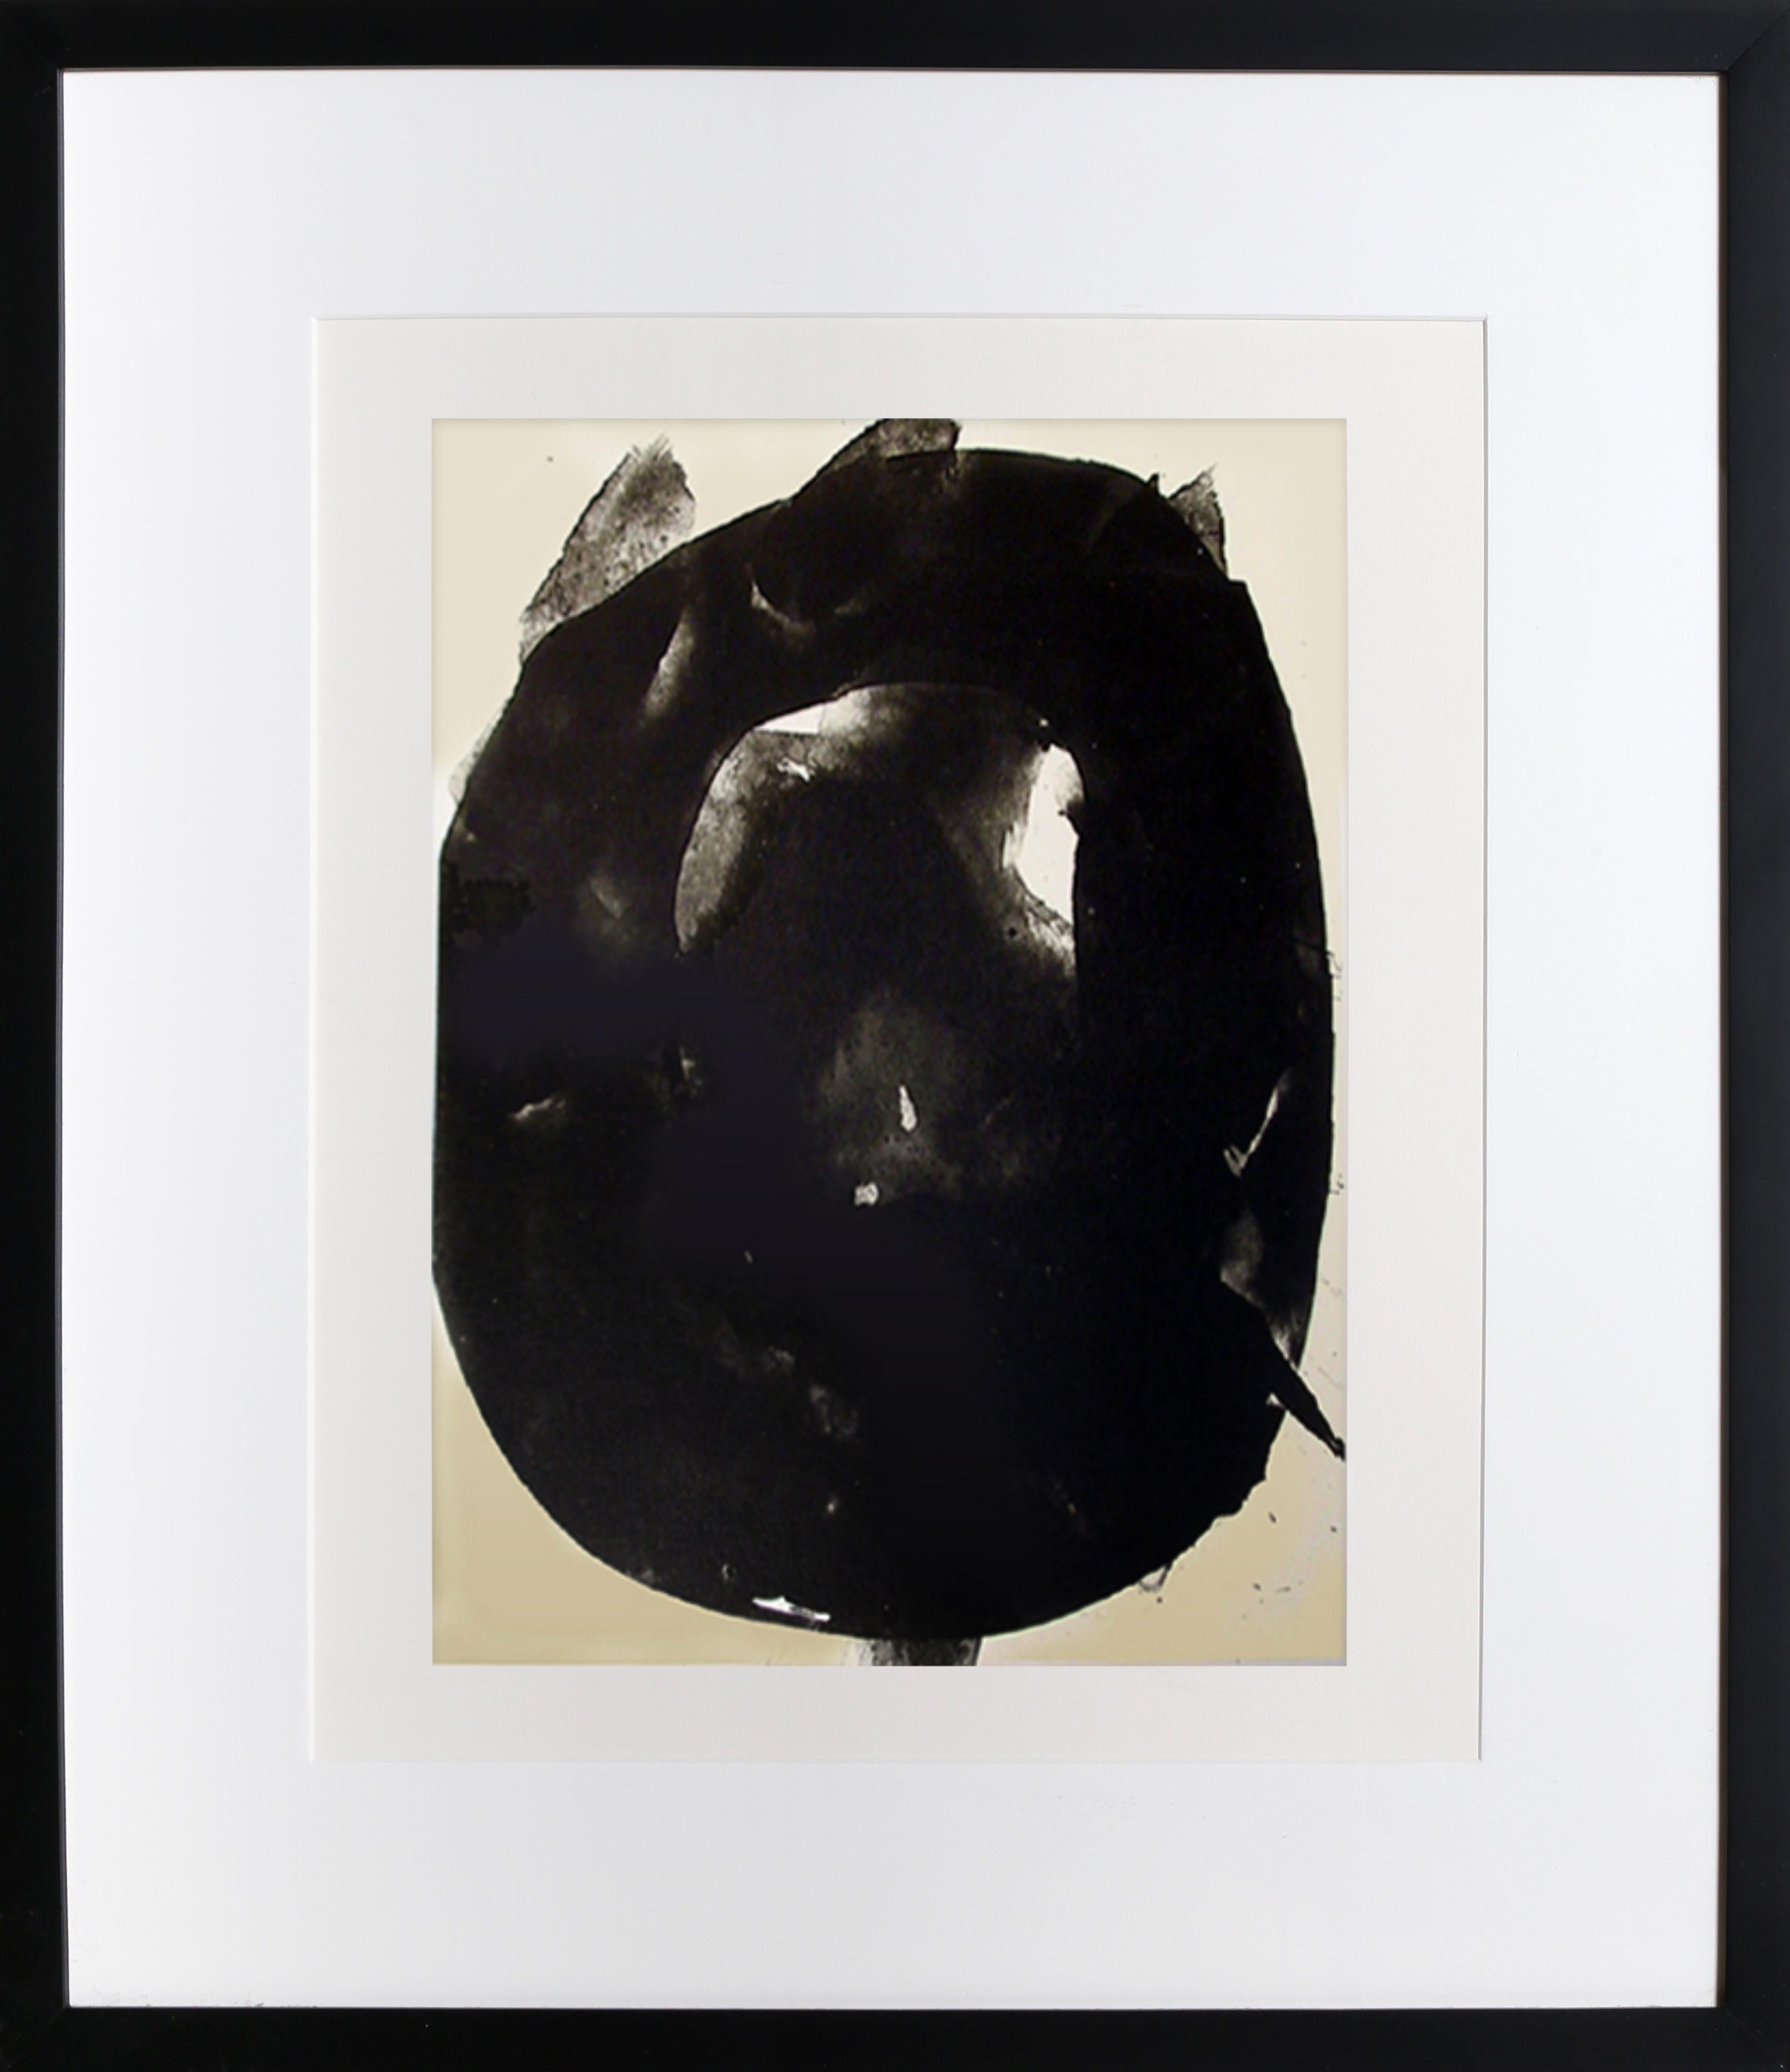 Three Poems: Nocturne V, Framed Lithograph by Robert Motherwell